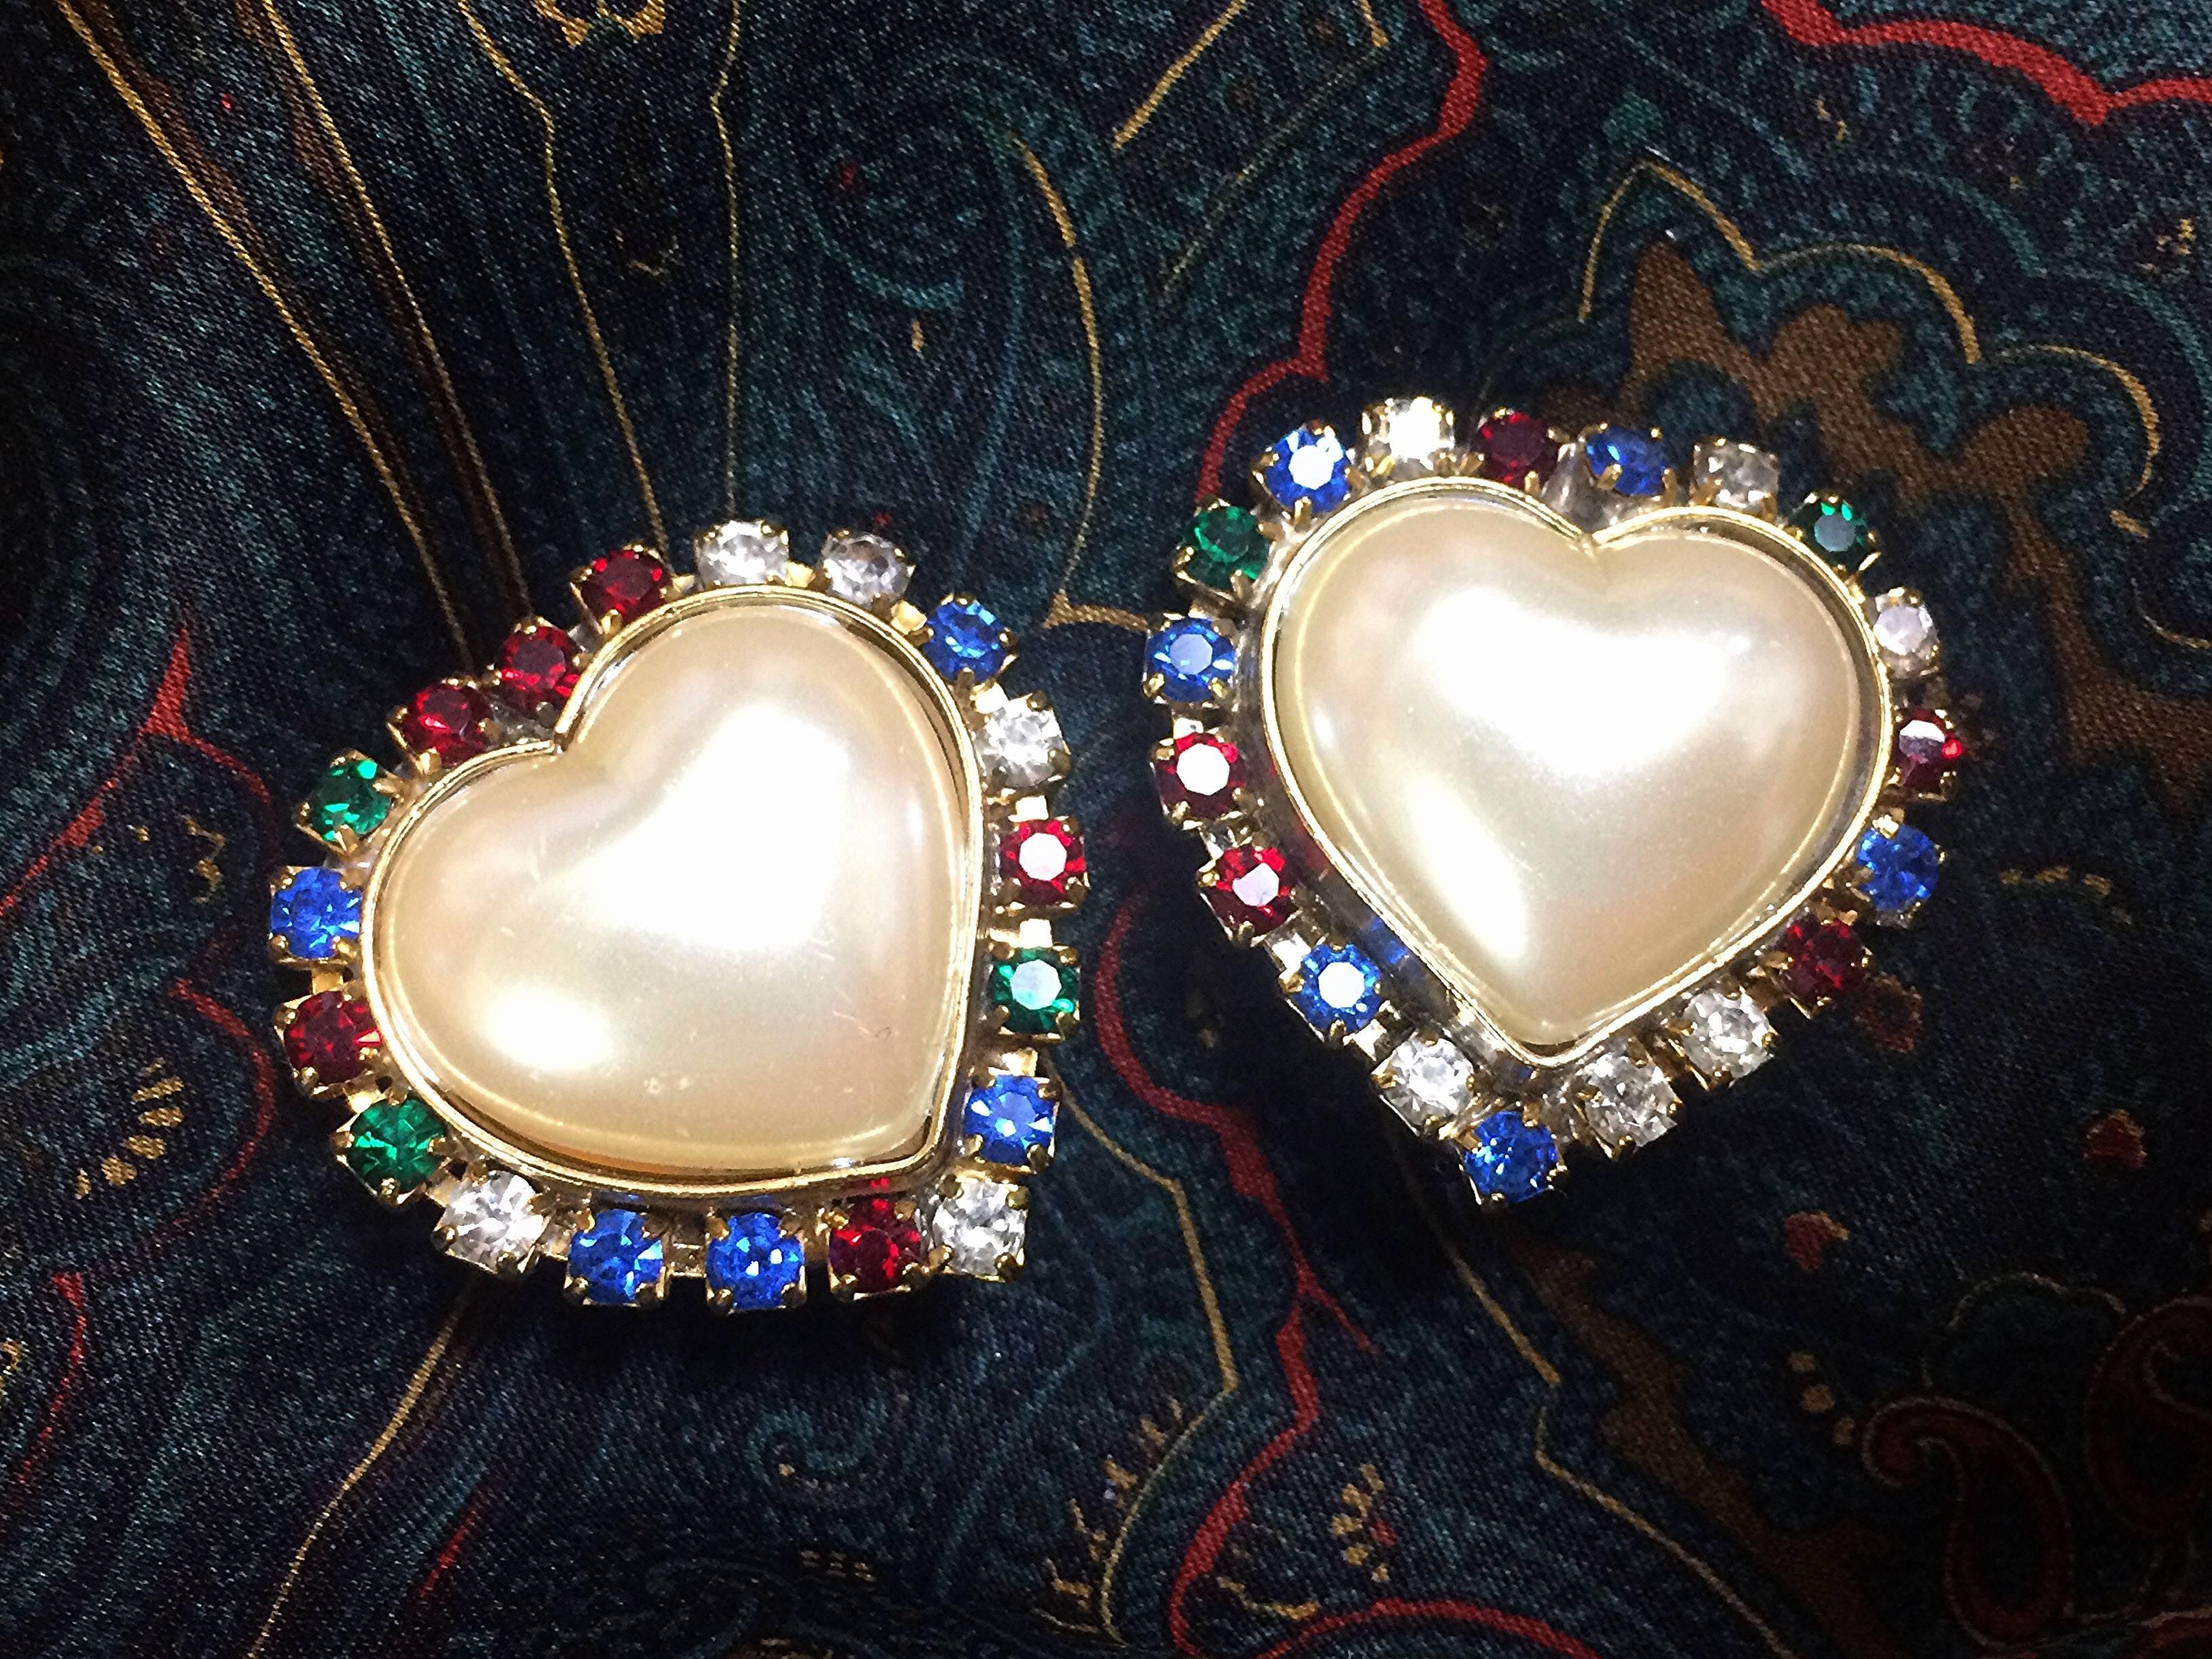 1990s. Vintage ESCADA faux pearl heart design earrings with red, clear, blue, and green crystals. Perfect vintage jewelry gift.

Fabulous heart shape faux pearl earrings with muticolor crystals around them from ESCADA back in the 90's.
Featuring